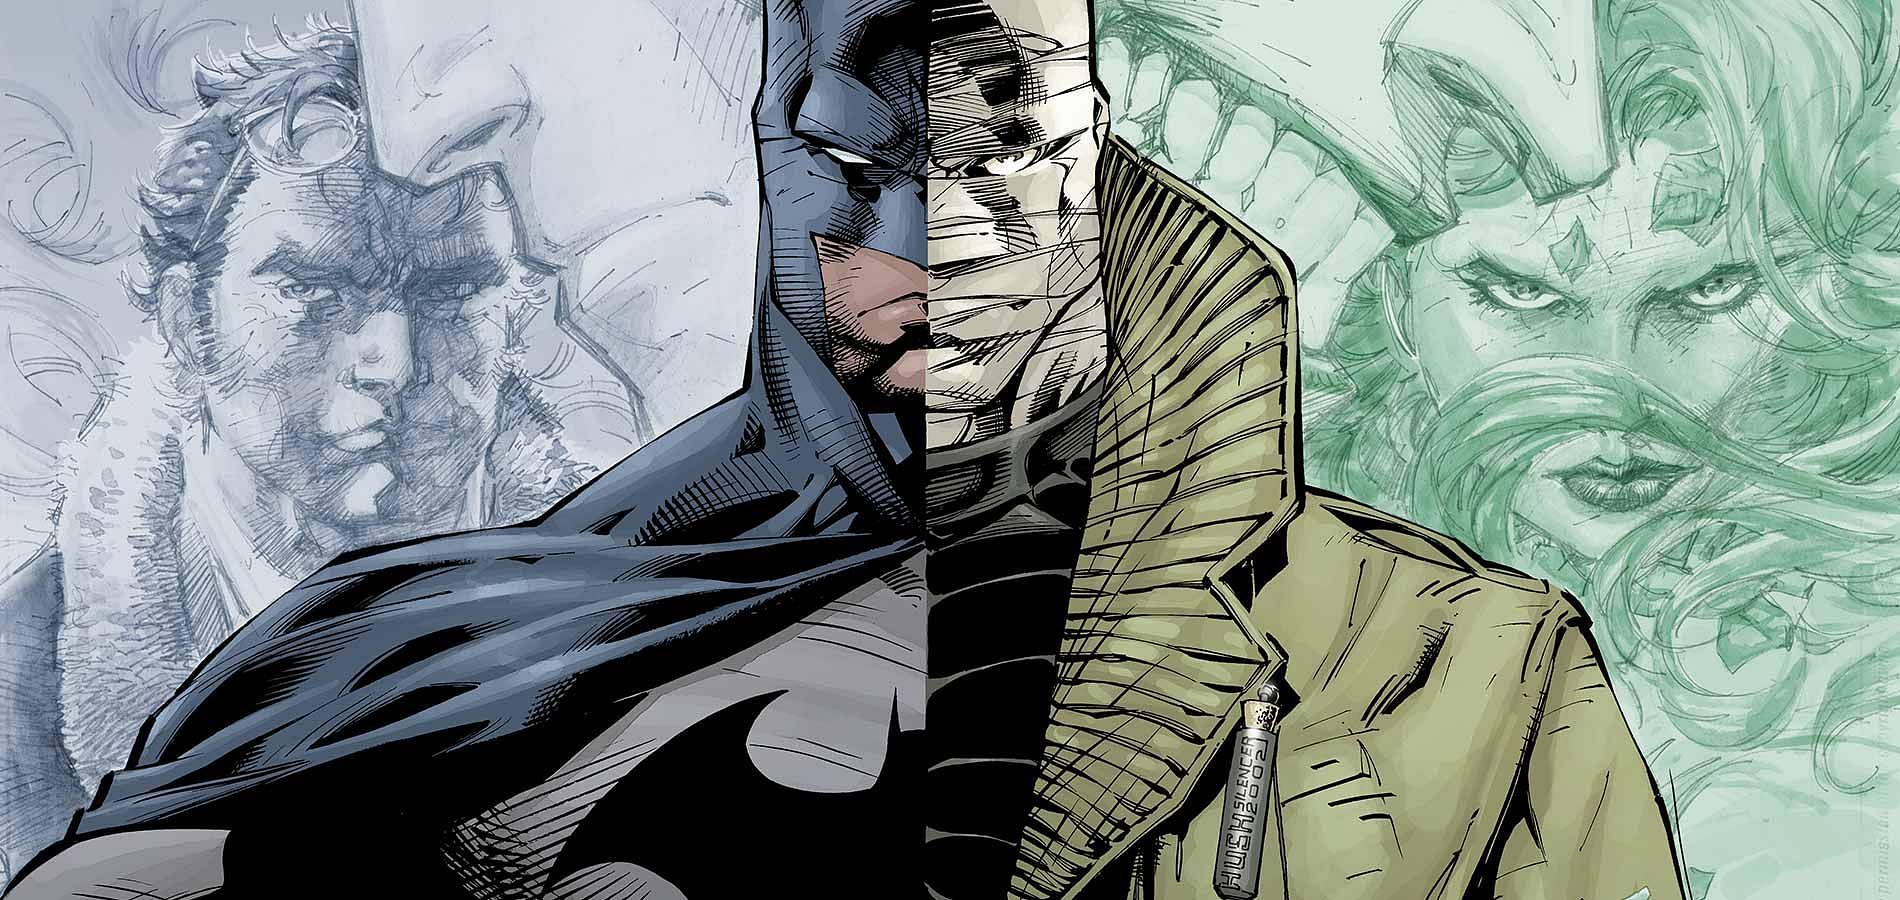 Hush in DC is more than just a villain, he is a personal nightmare for Batman, a friend who betrayed Bruce Wayne, a brother who envied him, a hush who became a scream. (Image via DC Comics)